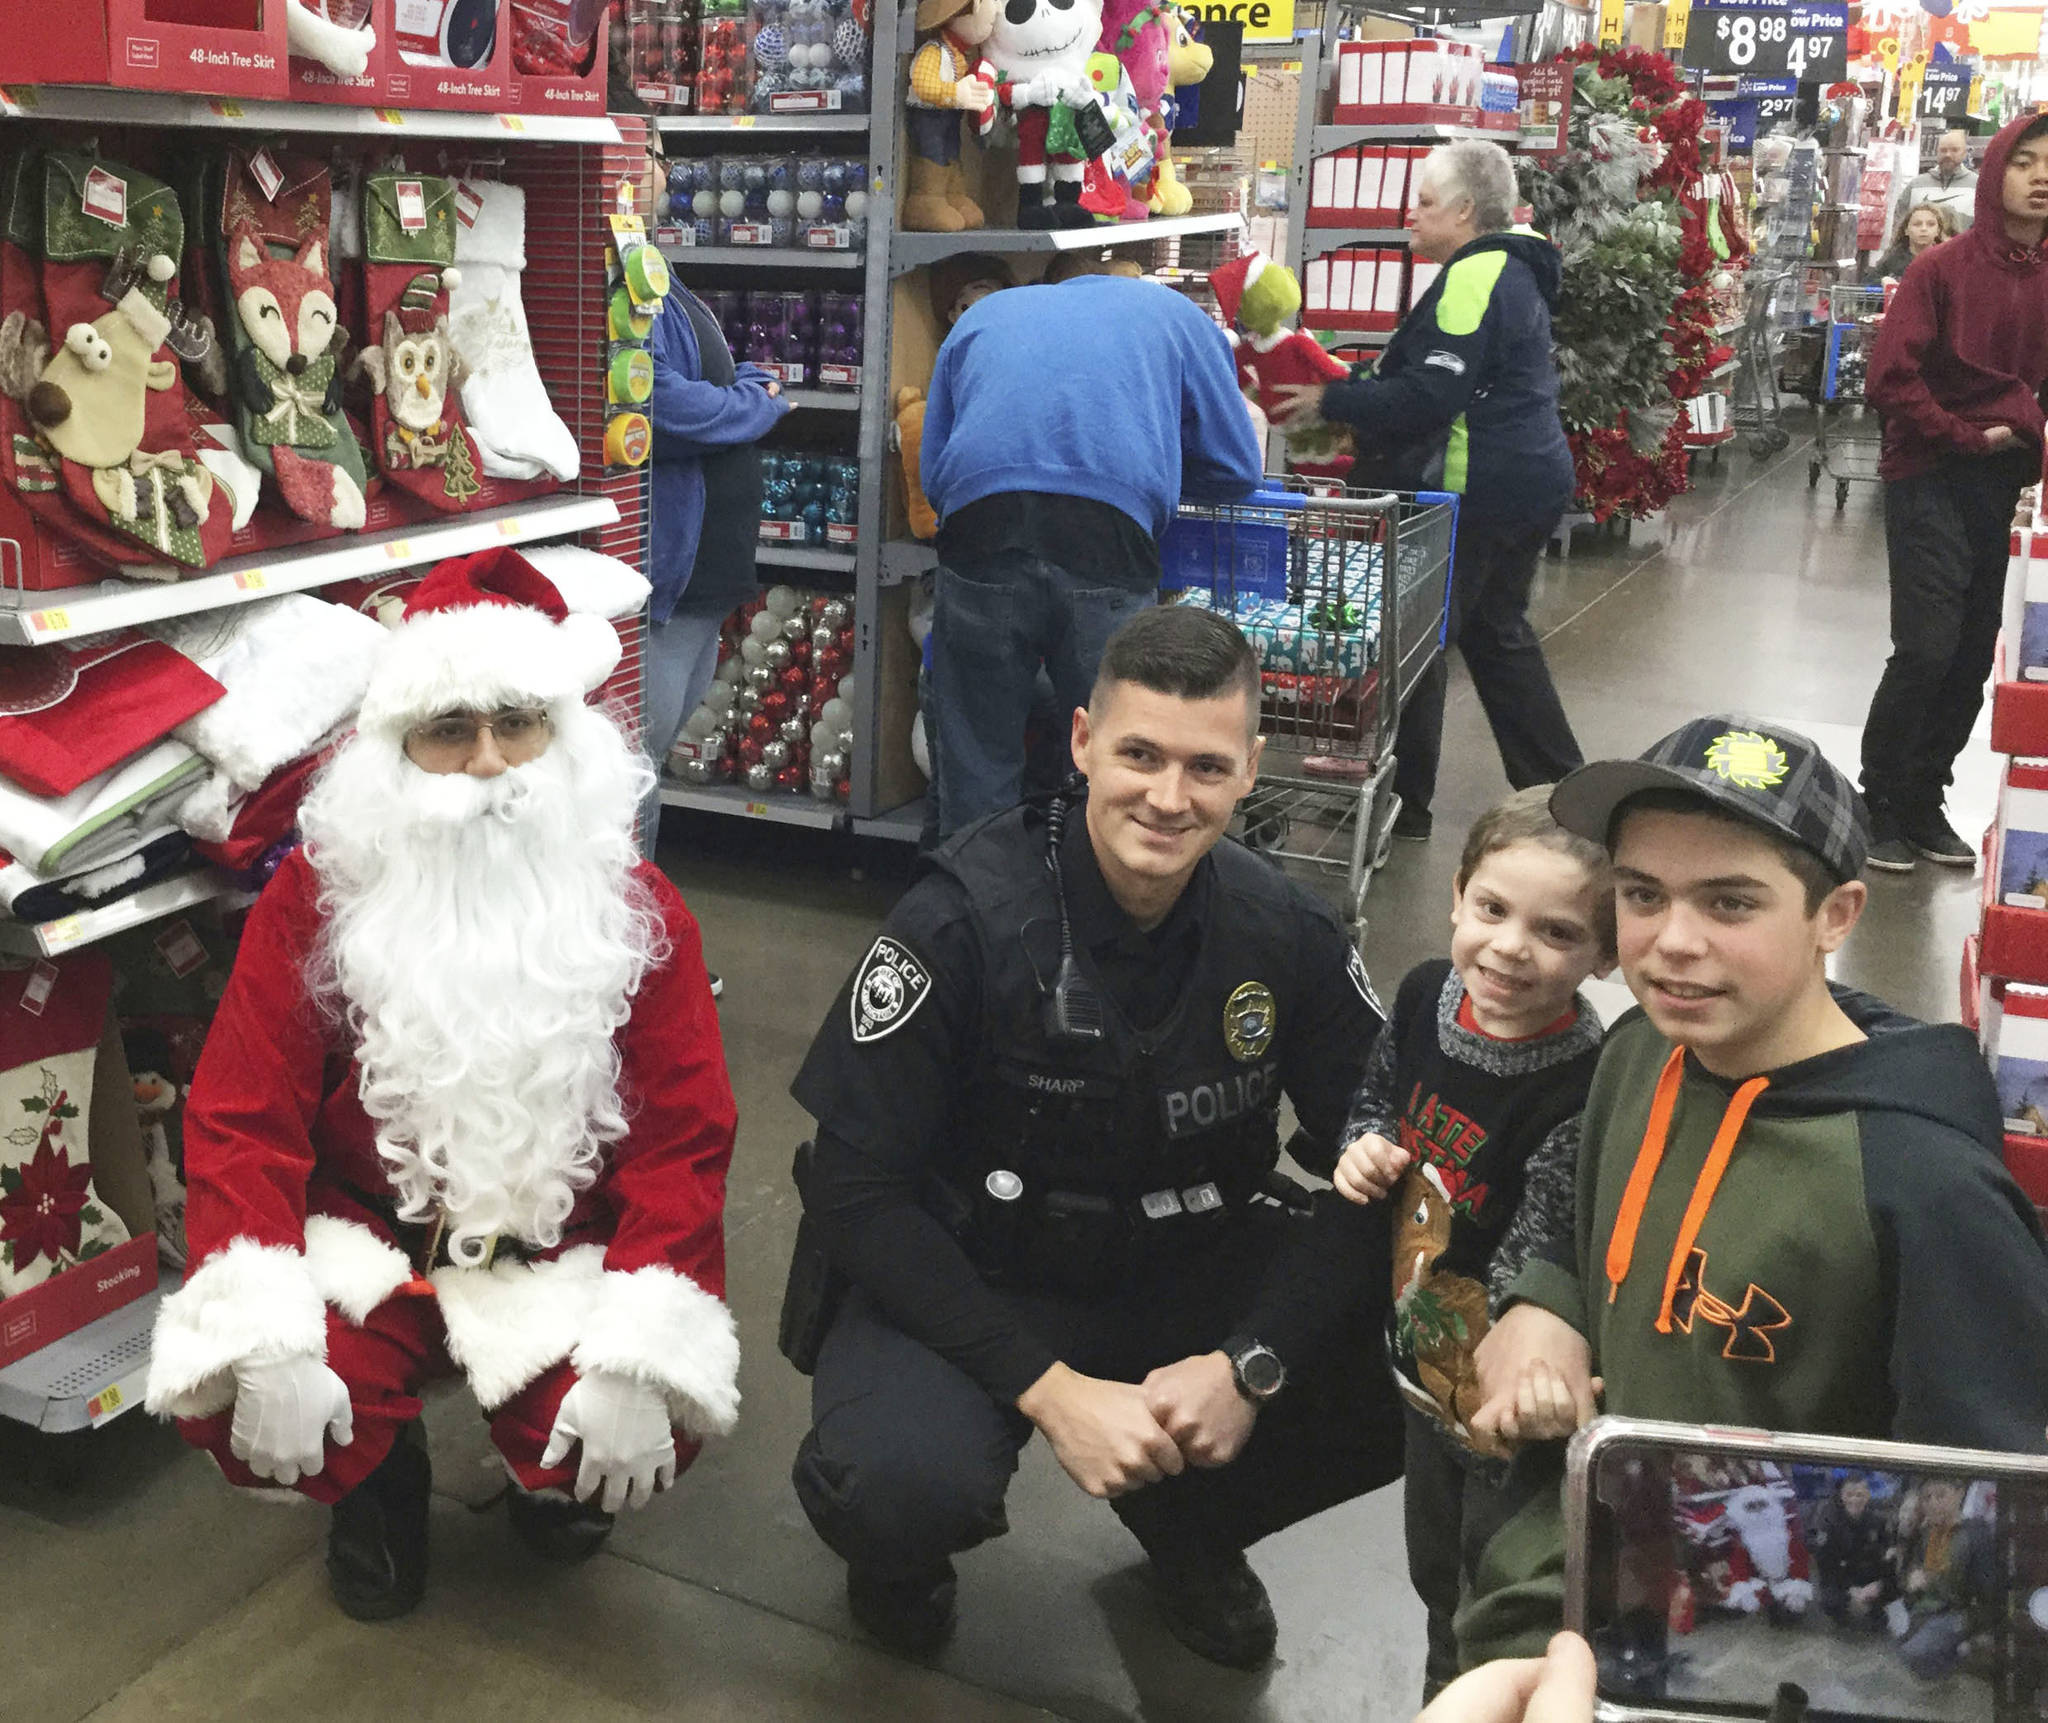 Hunter and Zach got help on their holiday shopping sprees at Walmart from Arlington Police Officer Shane Sharp.